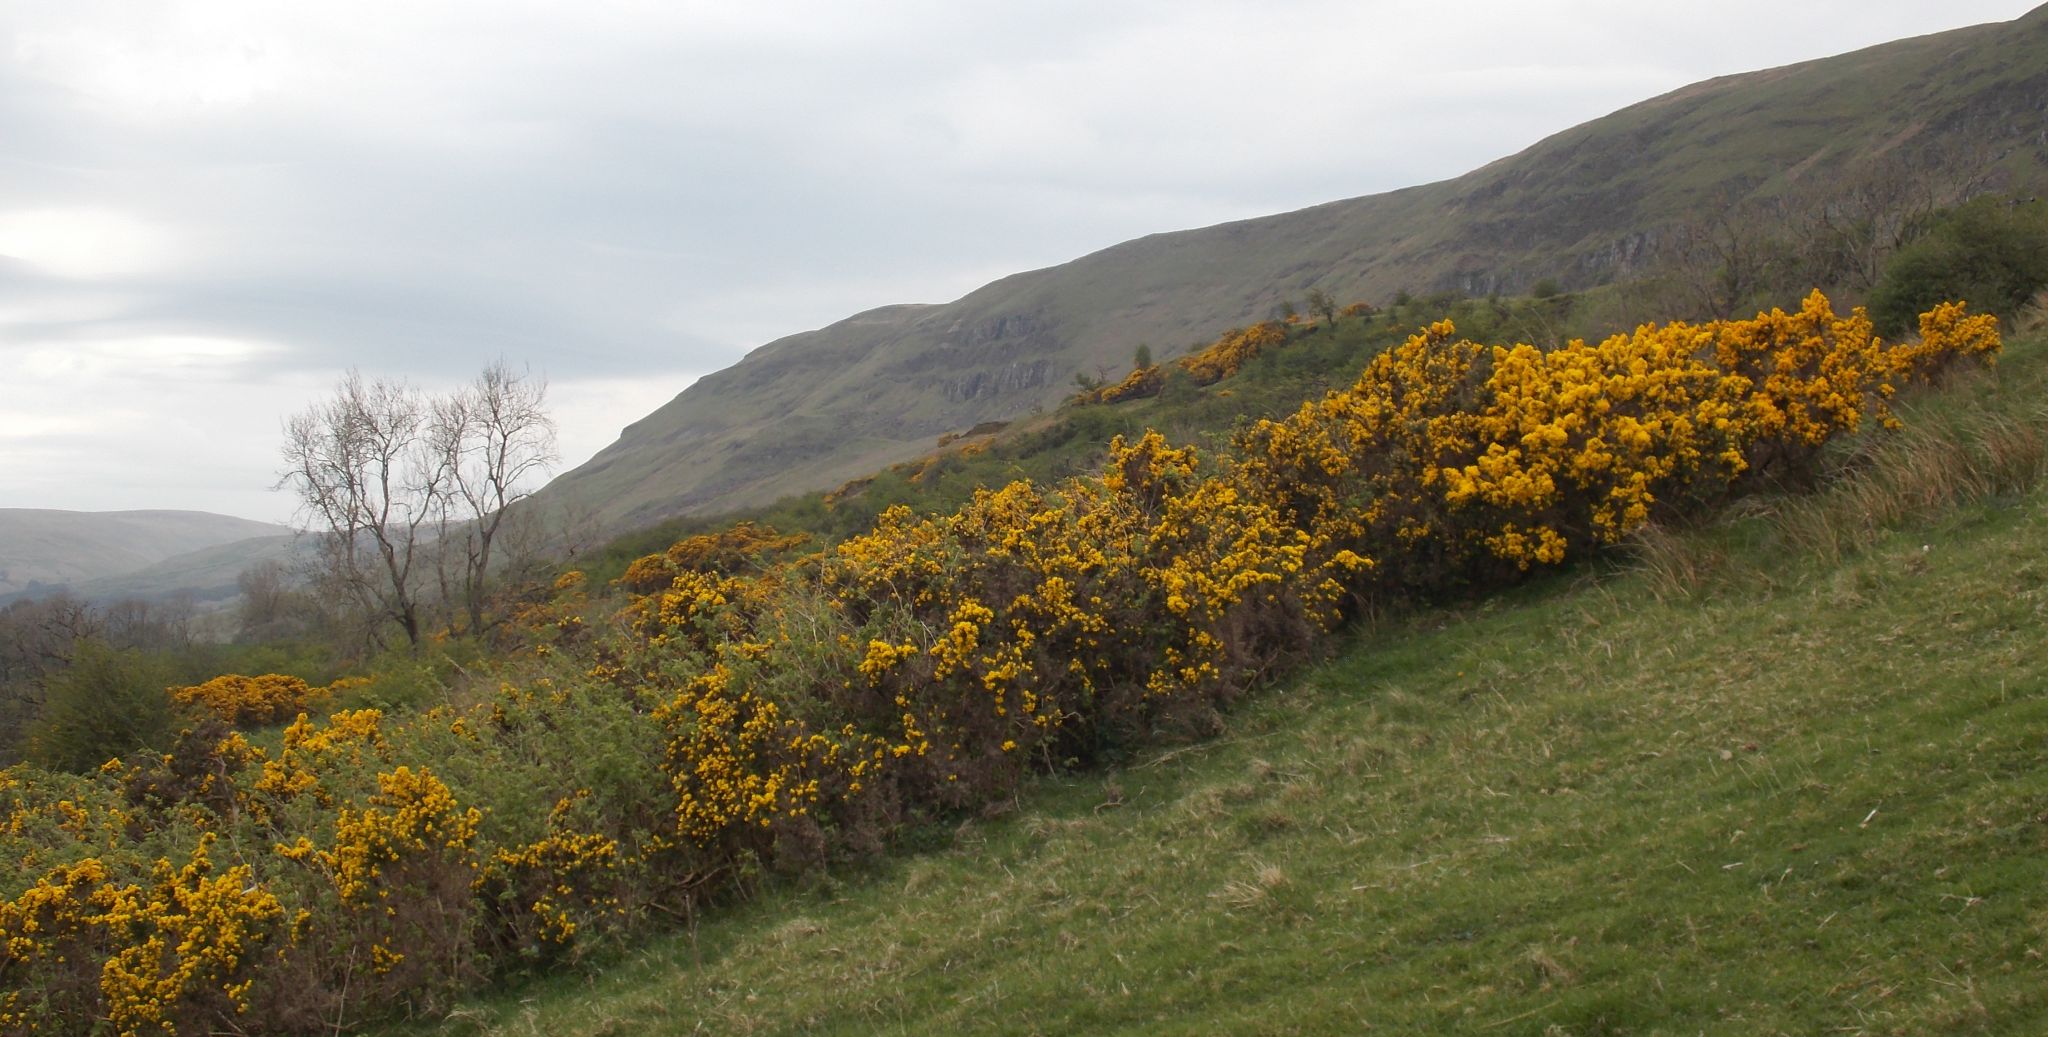 Gorse on descent from Campsie Fells